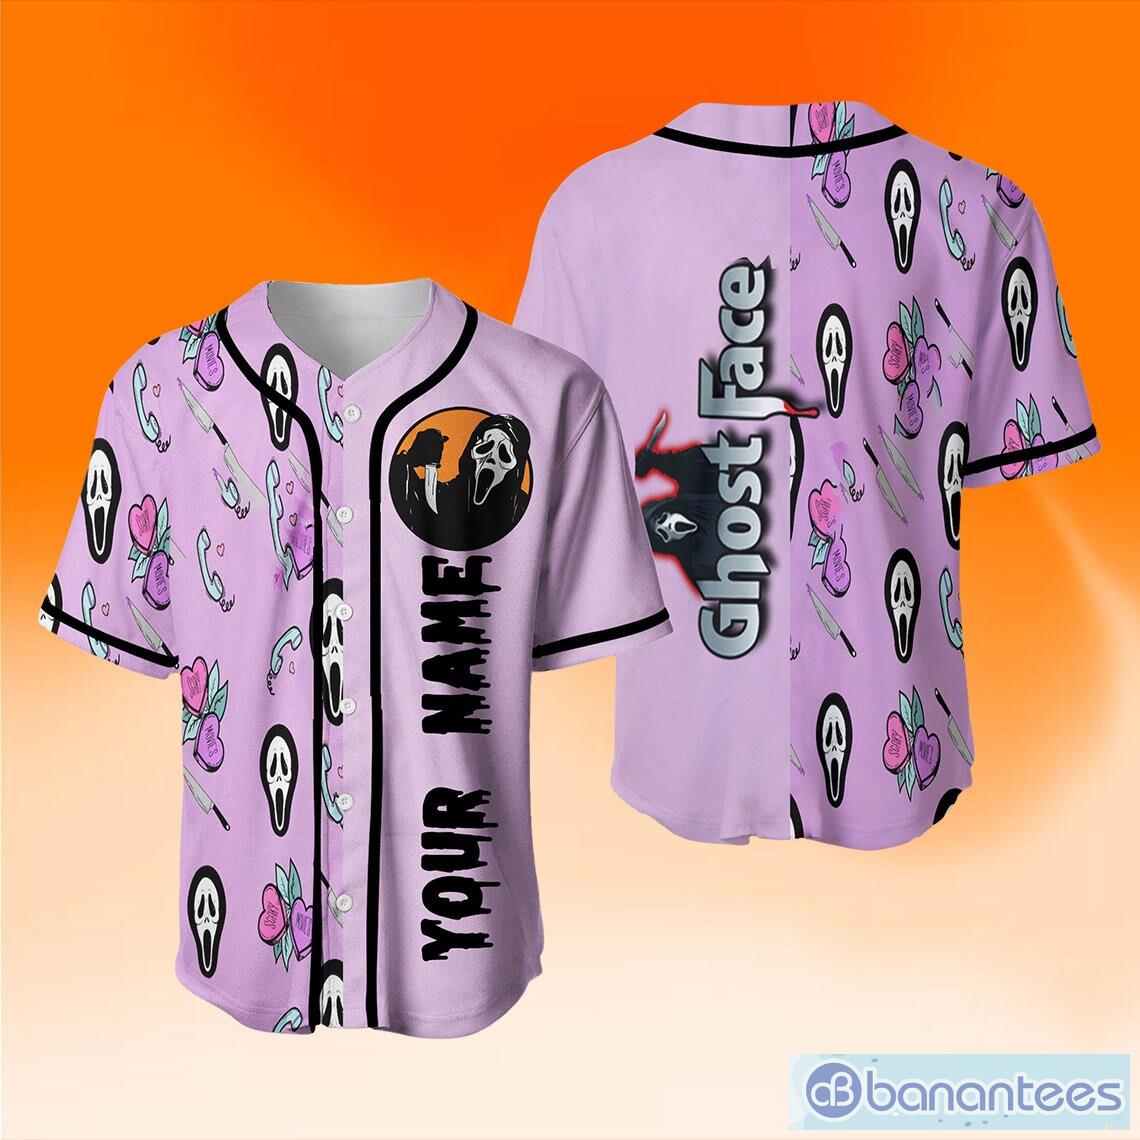 Personalized Pink Ghostface No You Hang up Baseball Jersey 